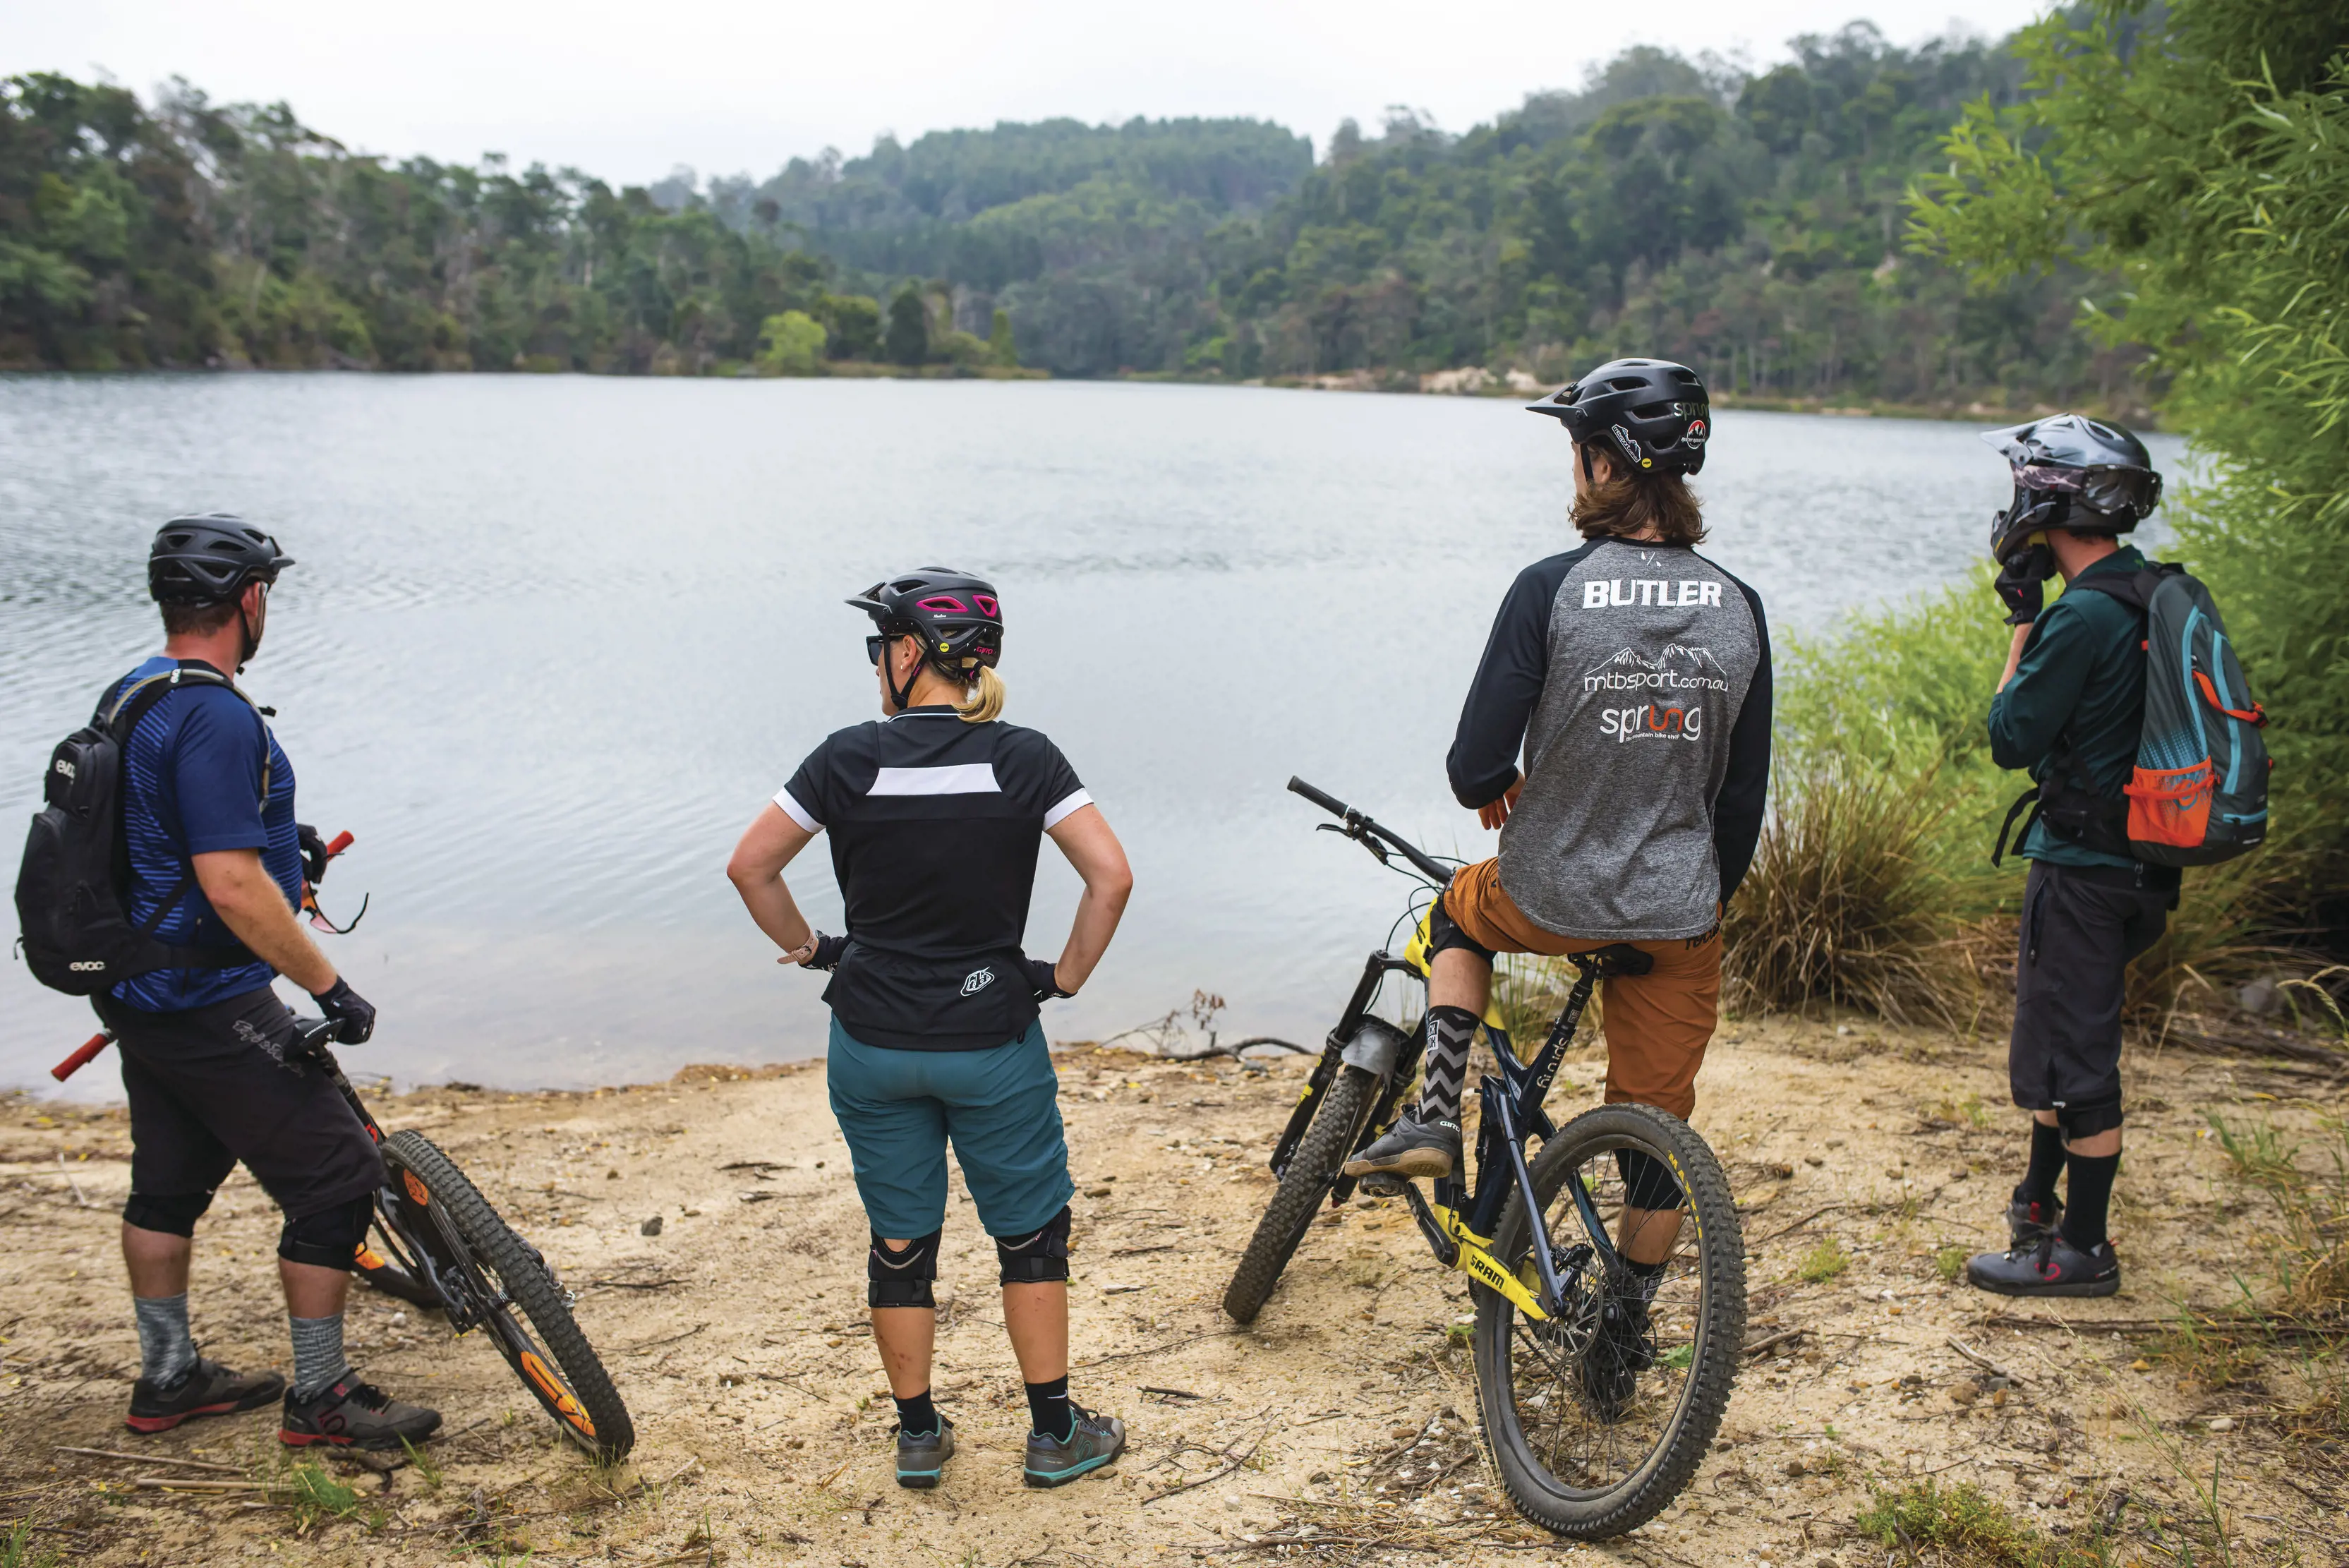 Four bike riders taking a break along a river bank, looking out into the wilderness, with Blue Derby Mountain Bike Trails.